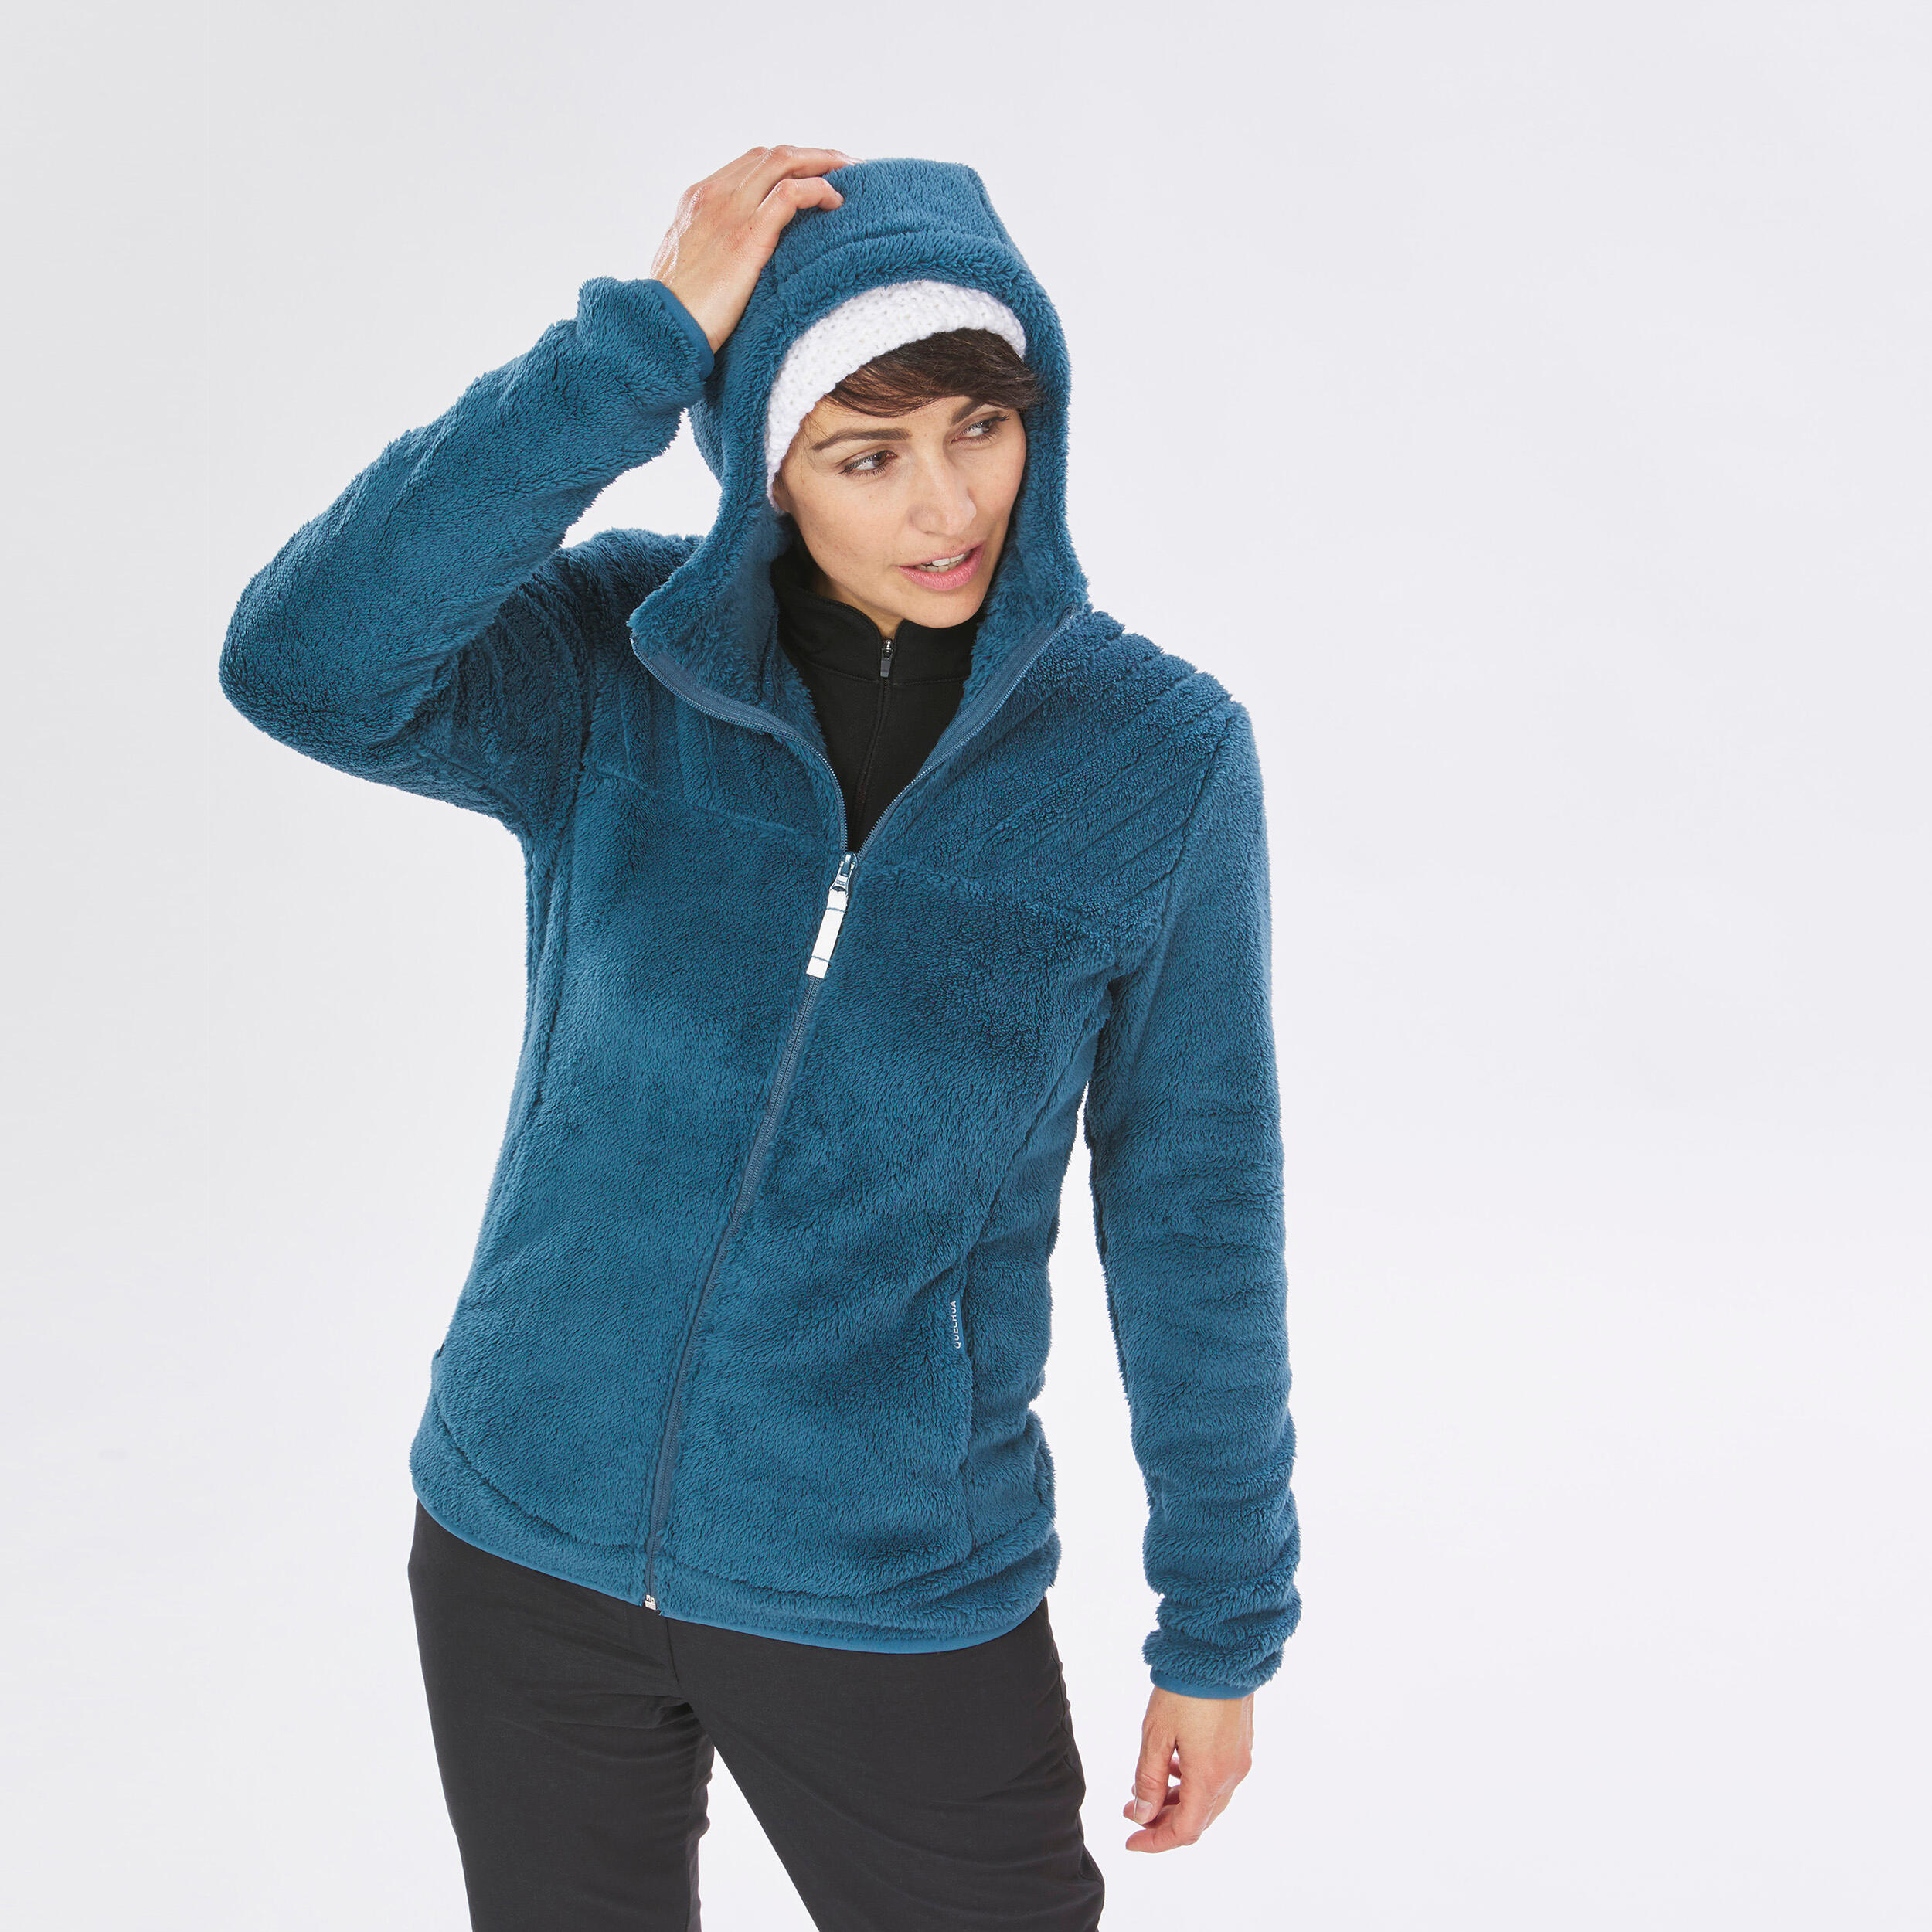 Decathlon Winter Wear Solid Dri fit / Sports Jackets for Women | Udaan -  B2B Buying for Retailers